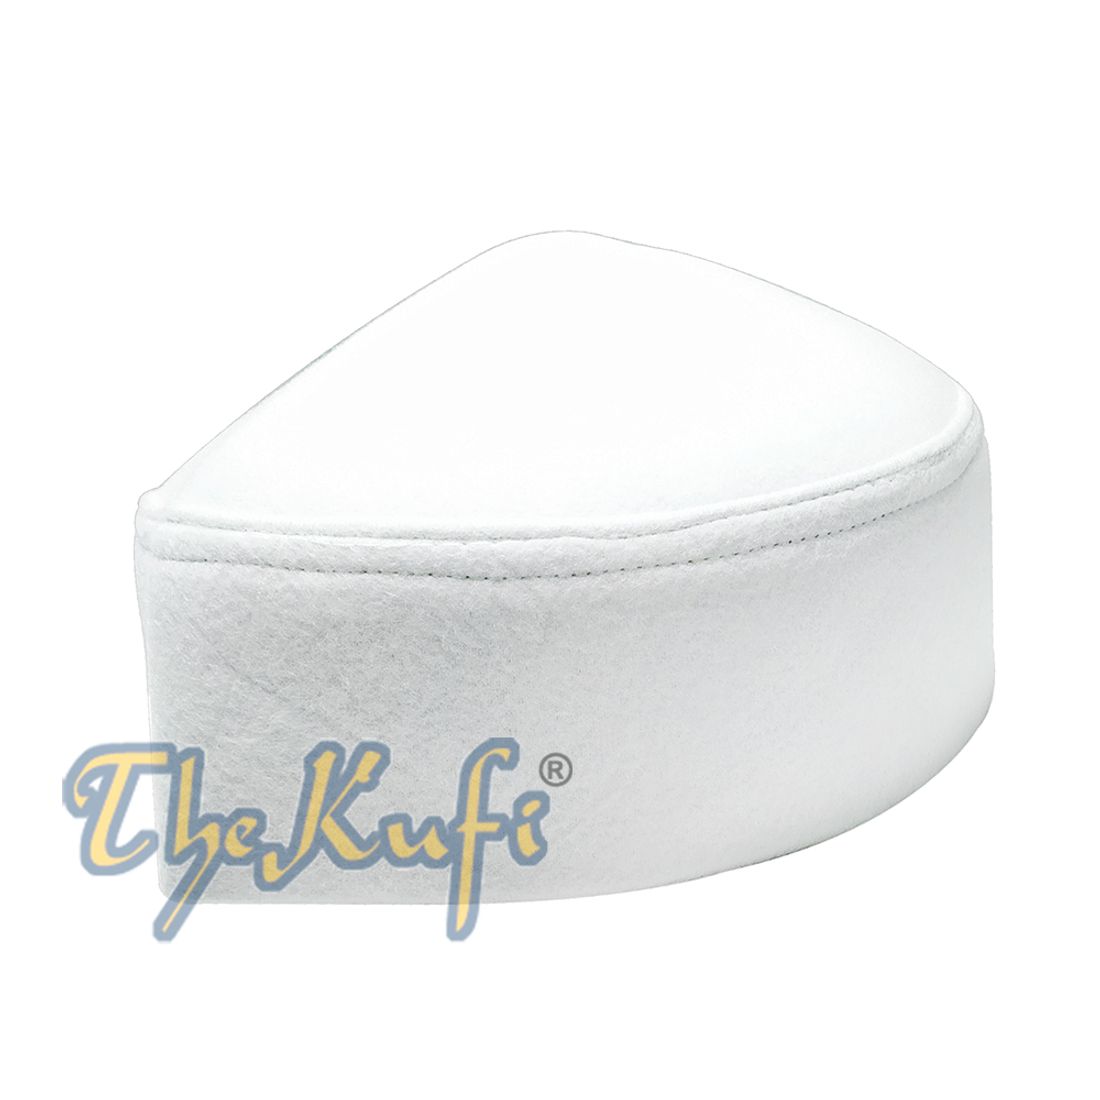 Solid White Moroccan Fez-Style Kufi Hat Cap with Pointed Top